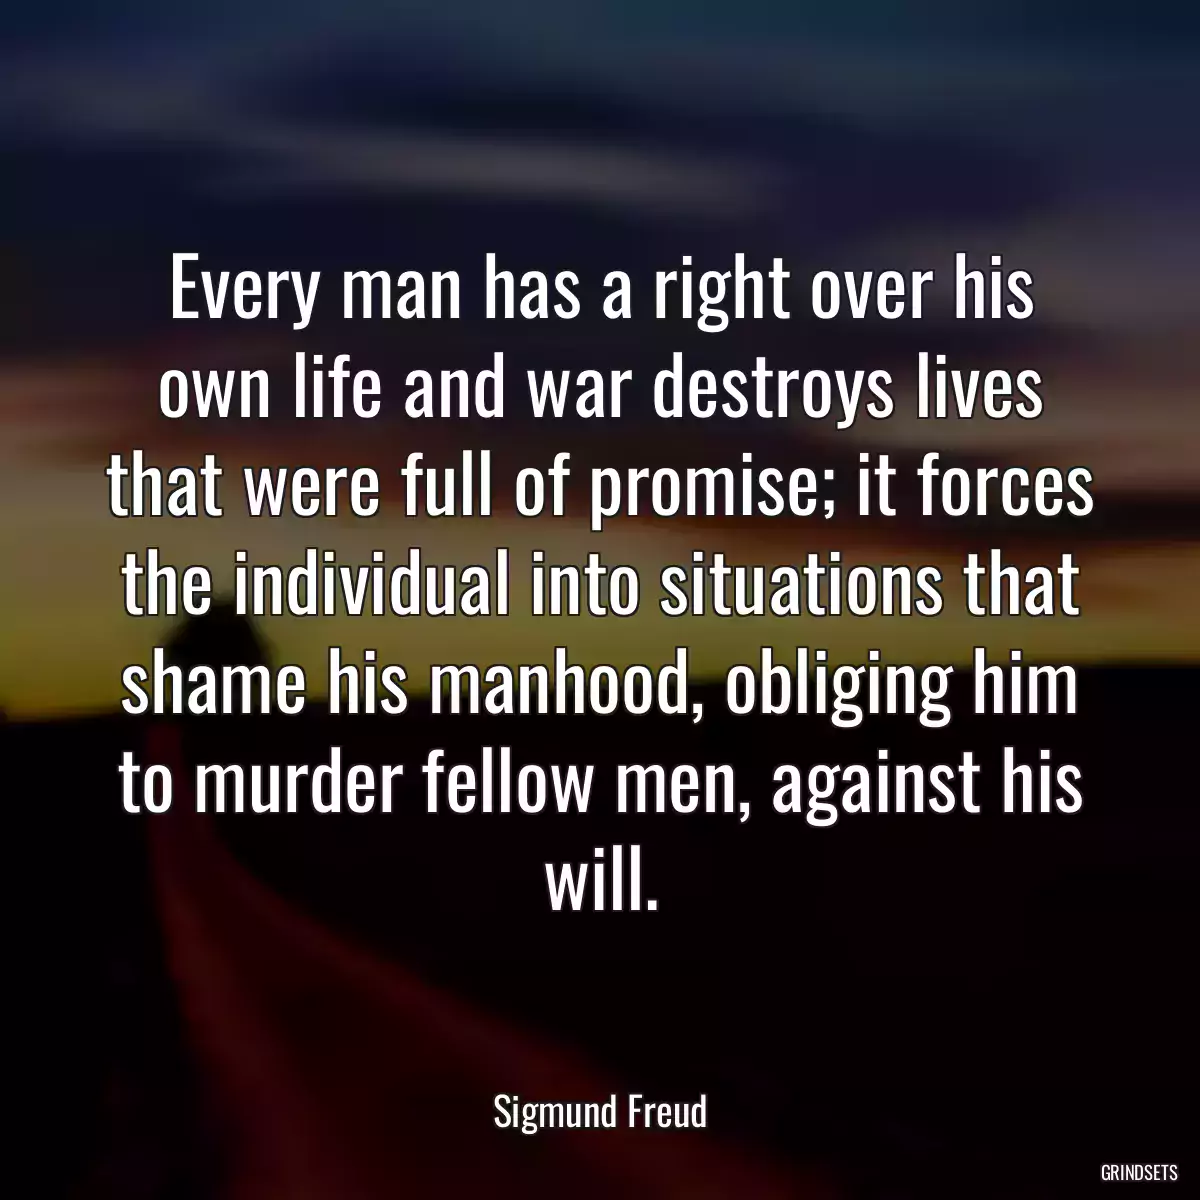 Every man has a right over his own life and war destroys lives that were full of promise; it forces the individual into situations that shame his manhood, obliging him to murder fellow men, against his will.